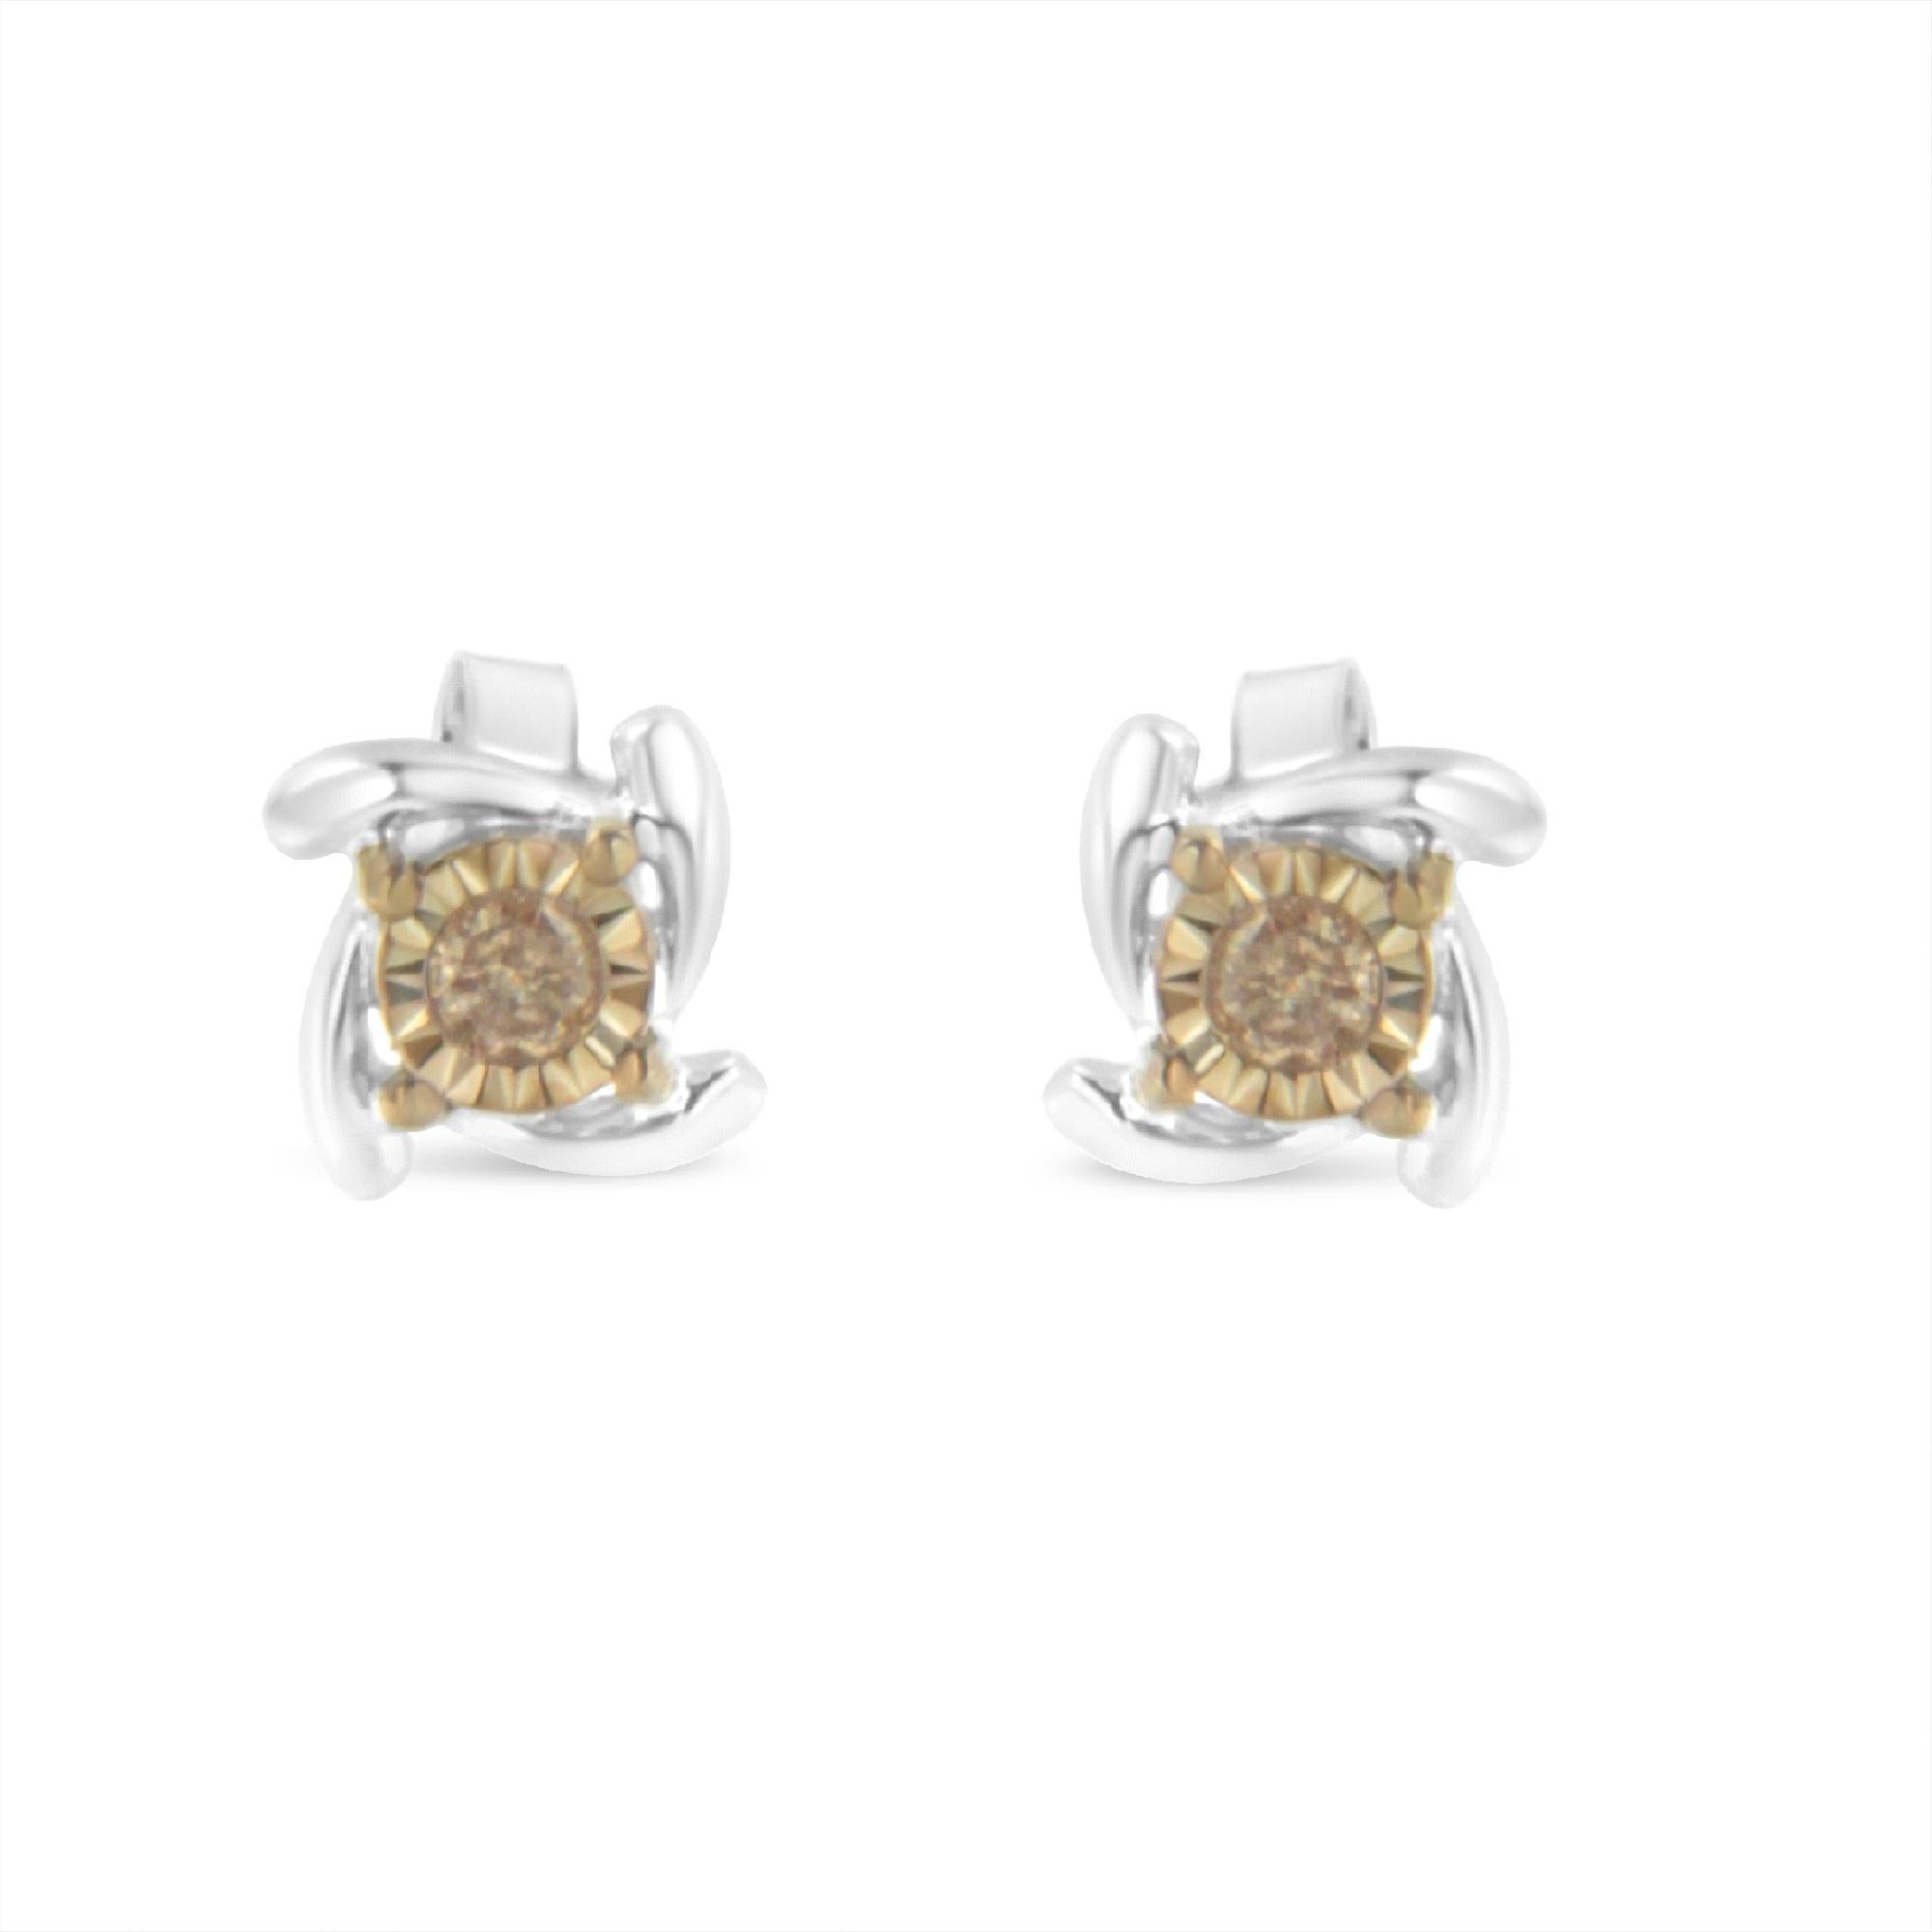 Dazzle with these stunning champagne diamond stud earrings. This unique color will pop among your already growing jewelry collection, and will add a bit of sparkle to your outfits, both casual and formal. Crafted from the finest .925 two-toned